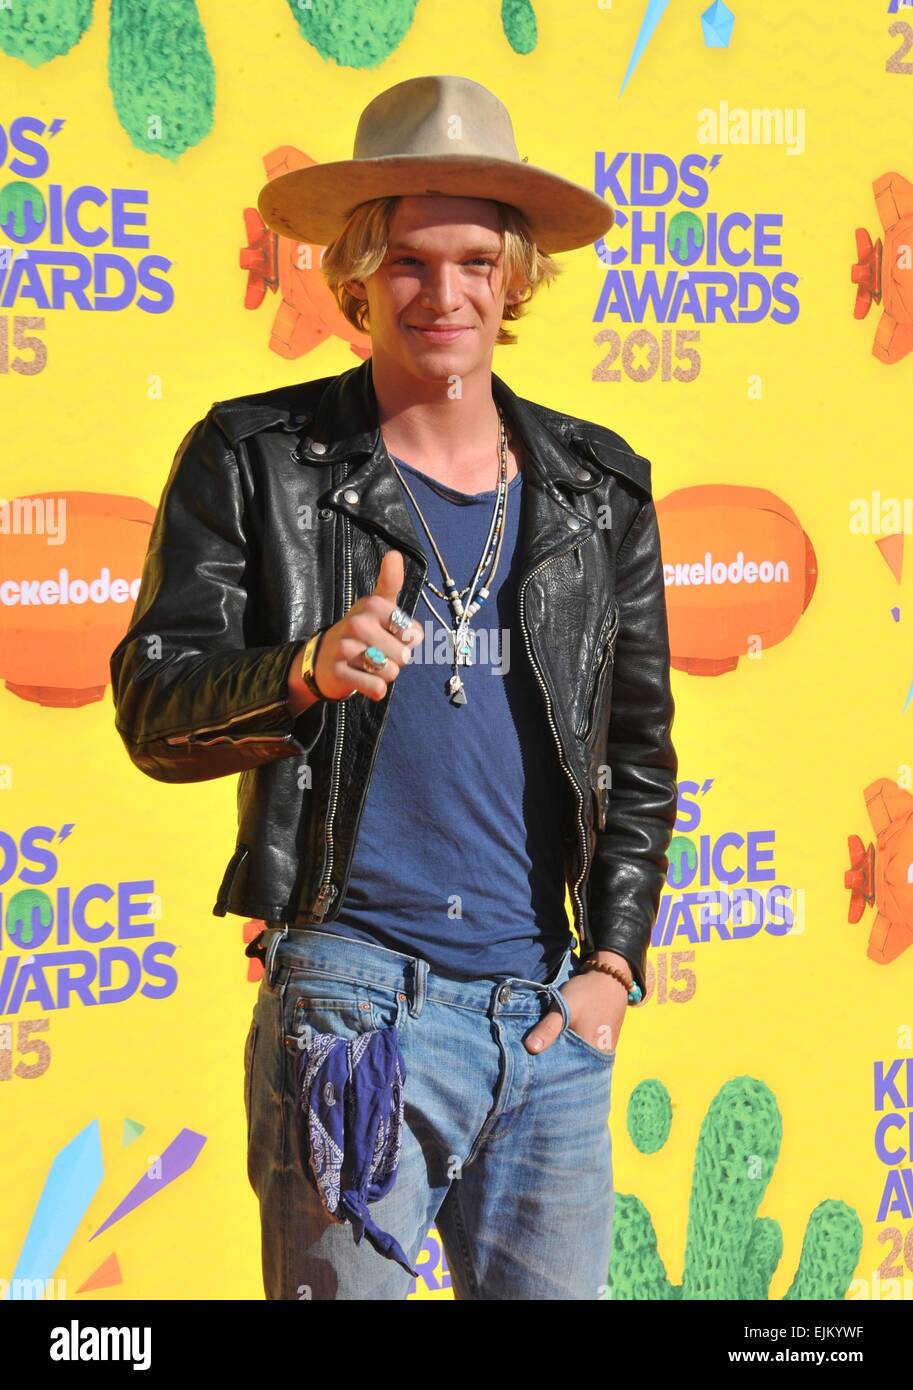 Los Angeles, CA, USA. 28th Mar, 2015. Cody Simpson at arrivals for Nickelodeon's 28th Annual Kids' Choice Awards 2015 - Part 2, The Forum, Los Angeles, CA March 28, 2015. Credit:  Dee Cercone/Everett Collection/Alamy Live News Stock Photo